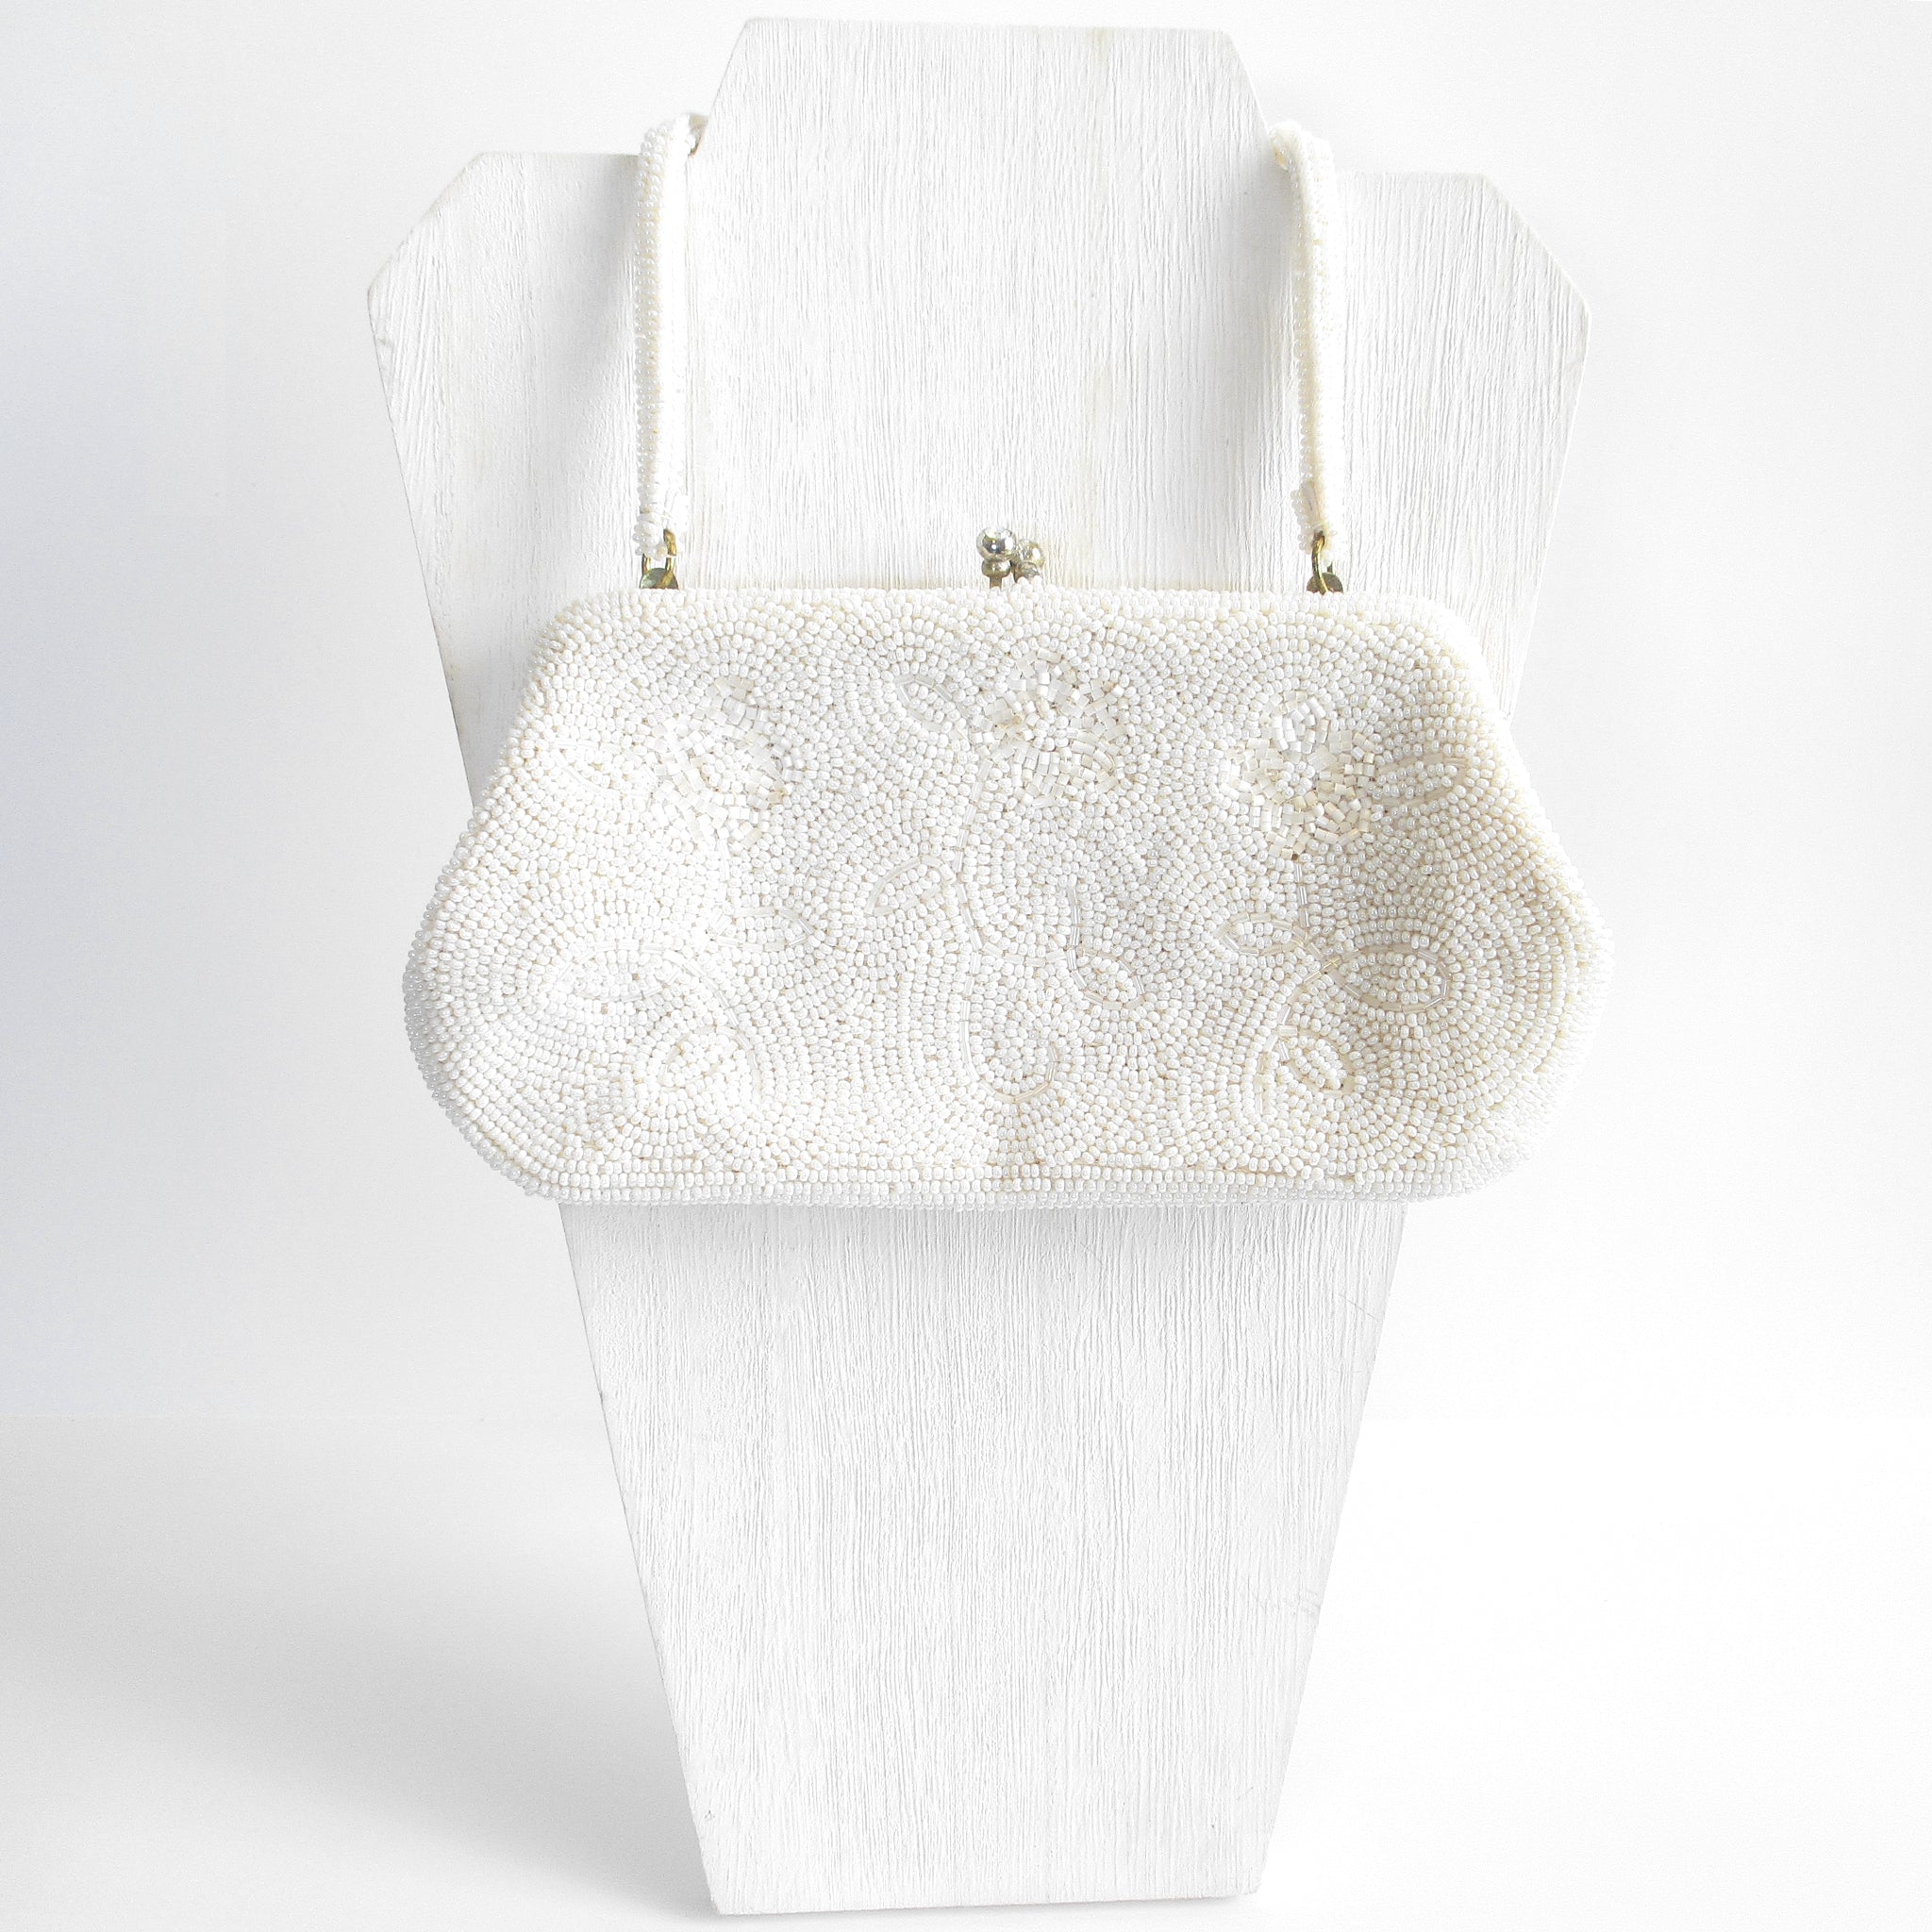 1950s White Glass Beaded Richere Bag by Walborg Made in Japan